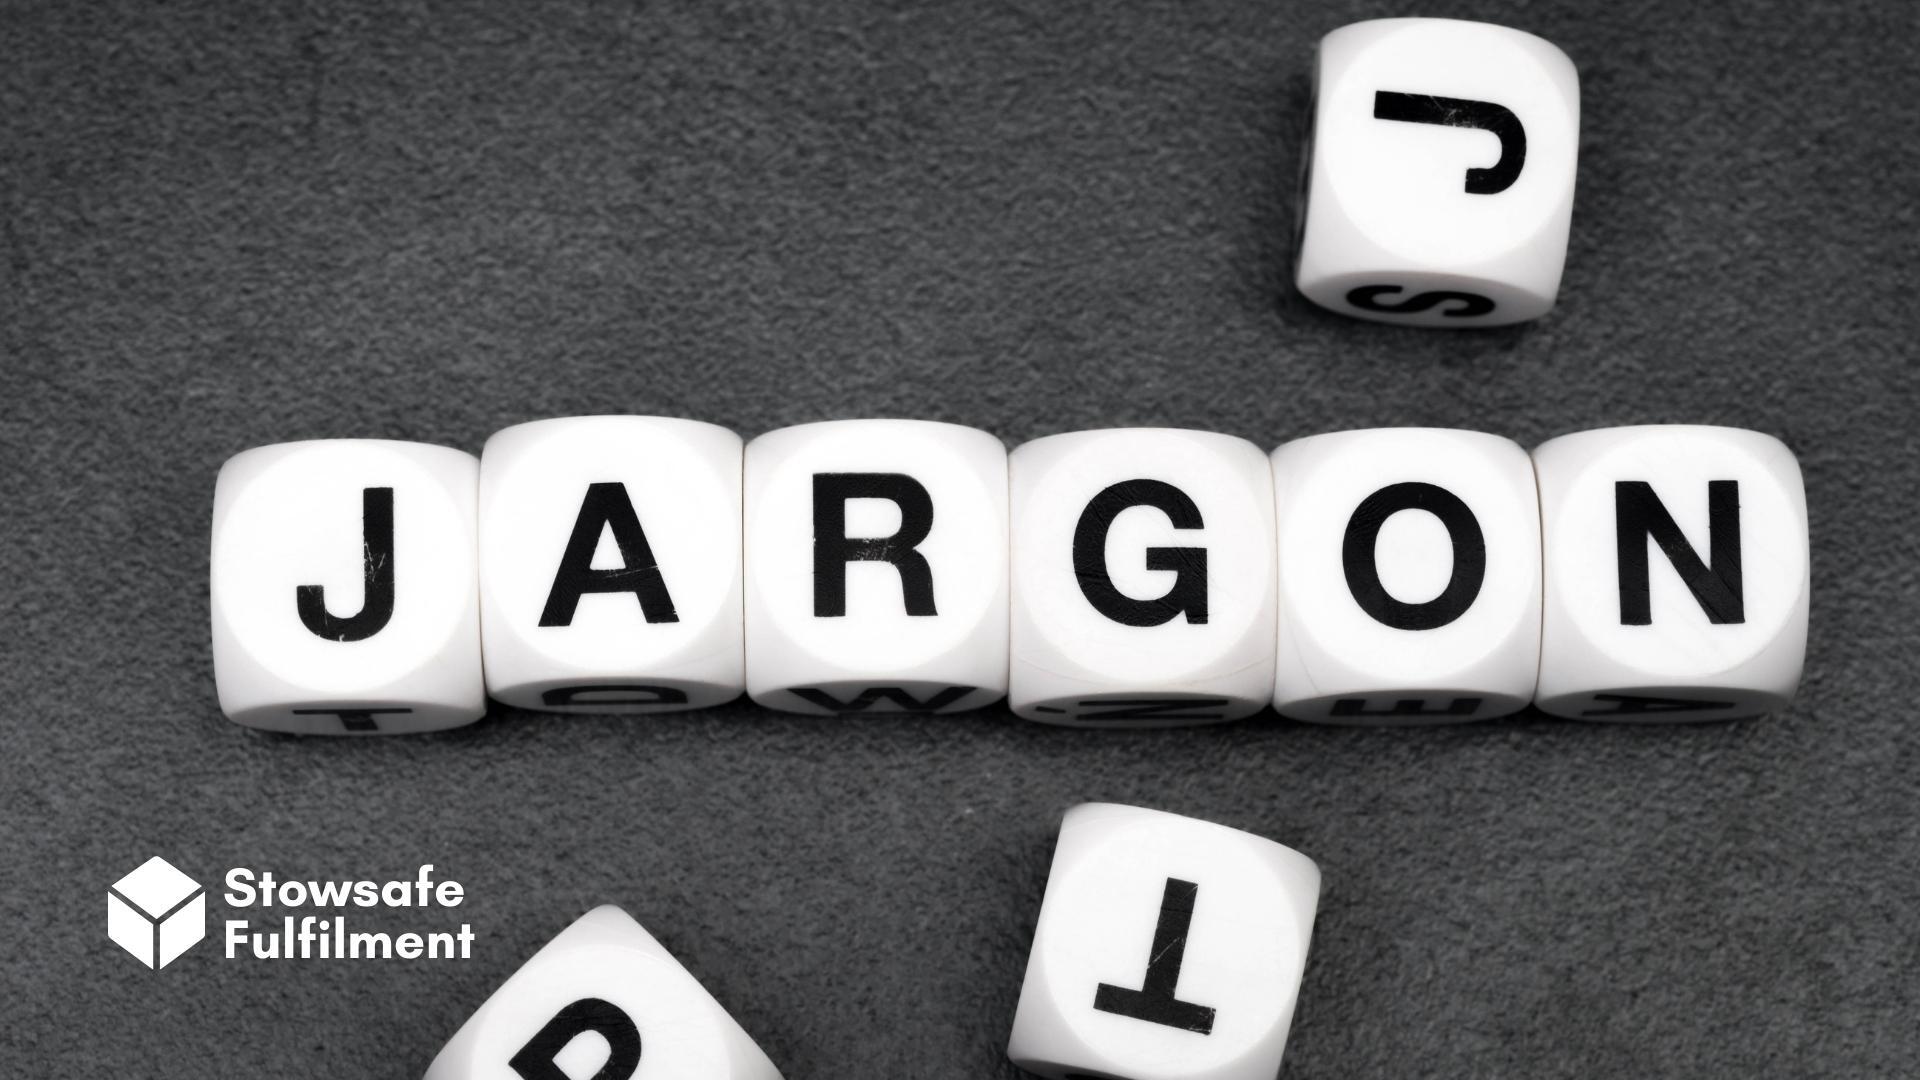 Do you know your ROPs from your RMAs? Here's an A-Z guide of logistics jargon to help you navigate the sometimes-confusing world of fulfilment.